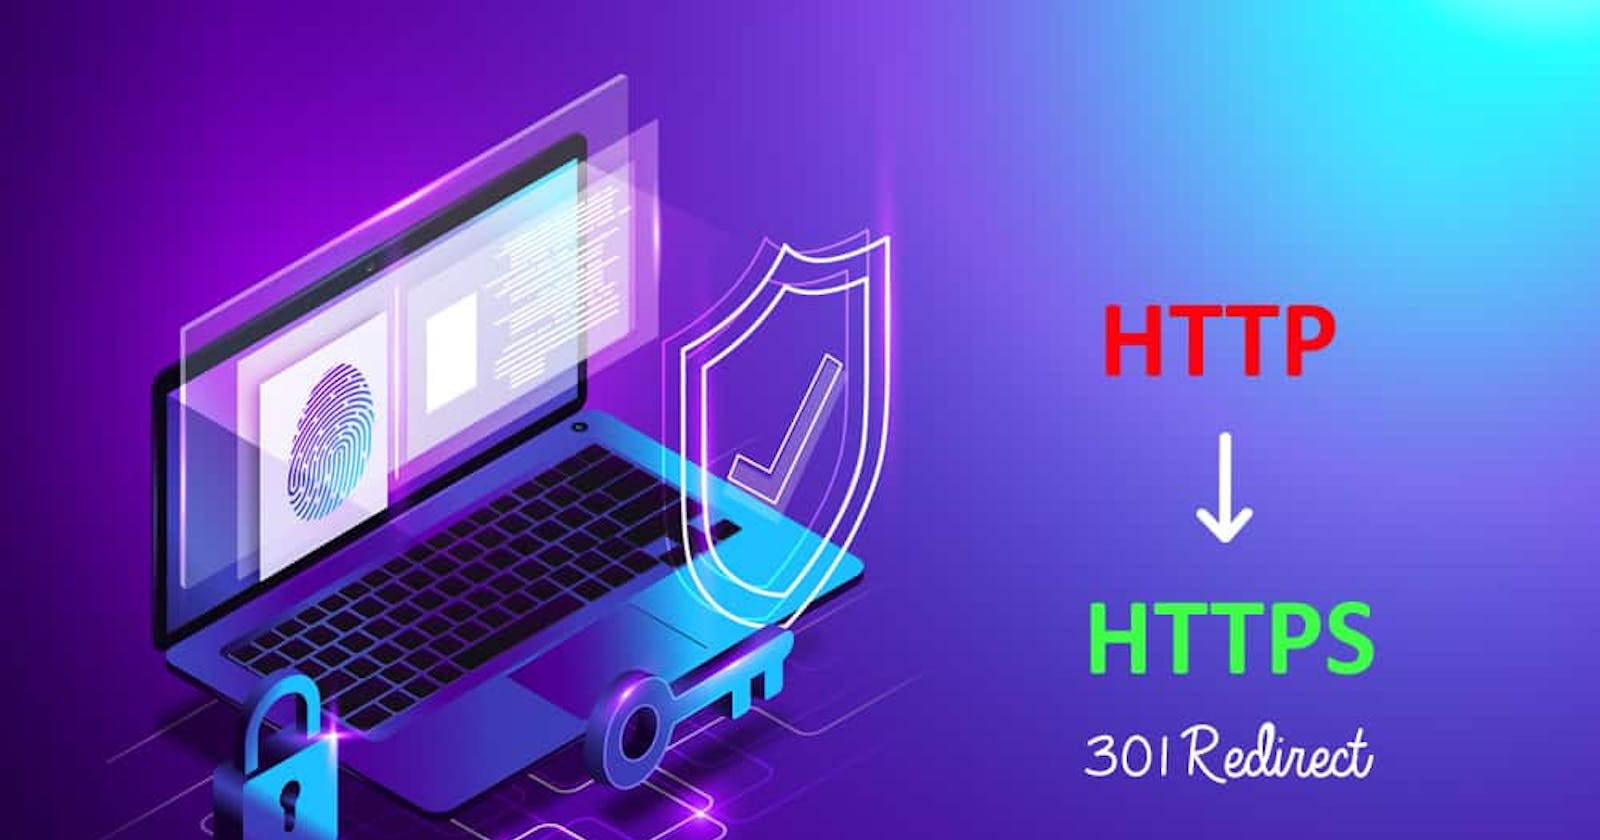 A complete guide on how to redirect HTTP to HTTPS using .htaccess file.